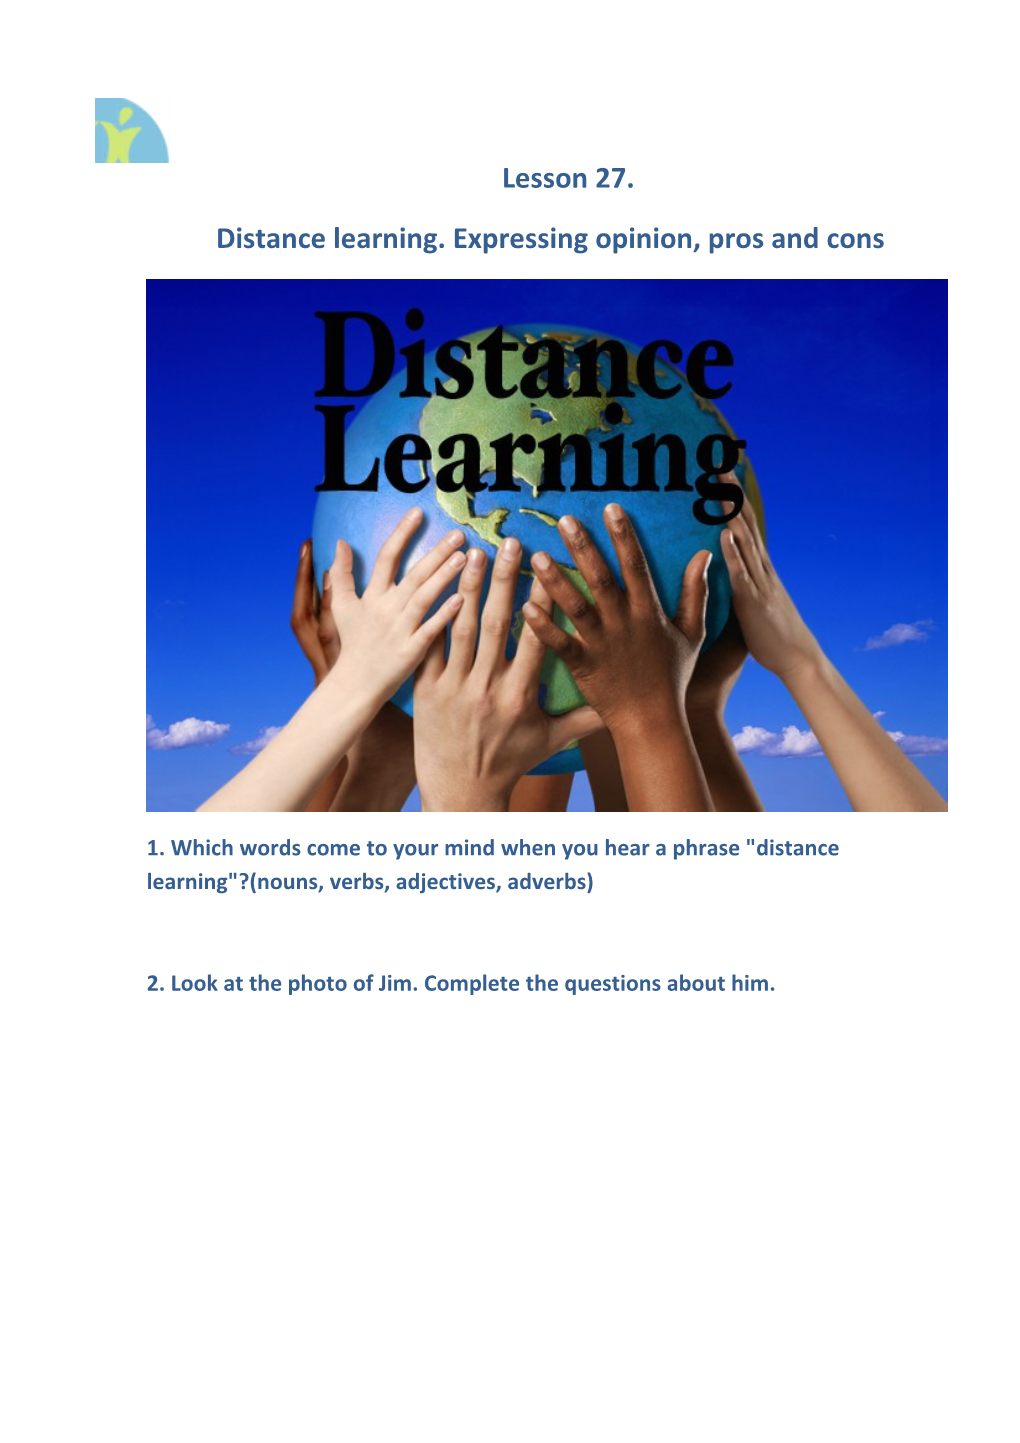 Distance Learning. Expressing Opinion, Pros and Cons